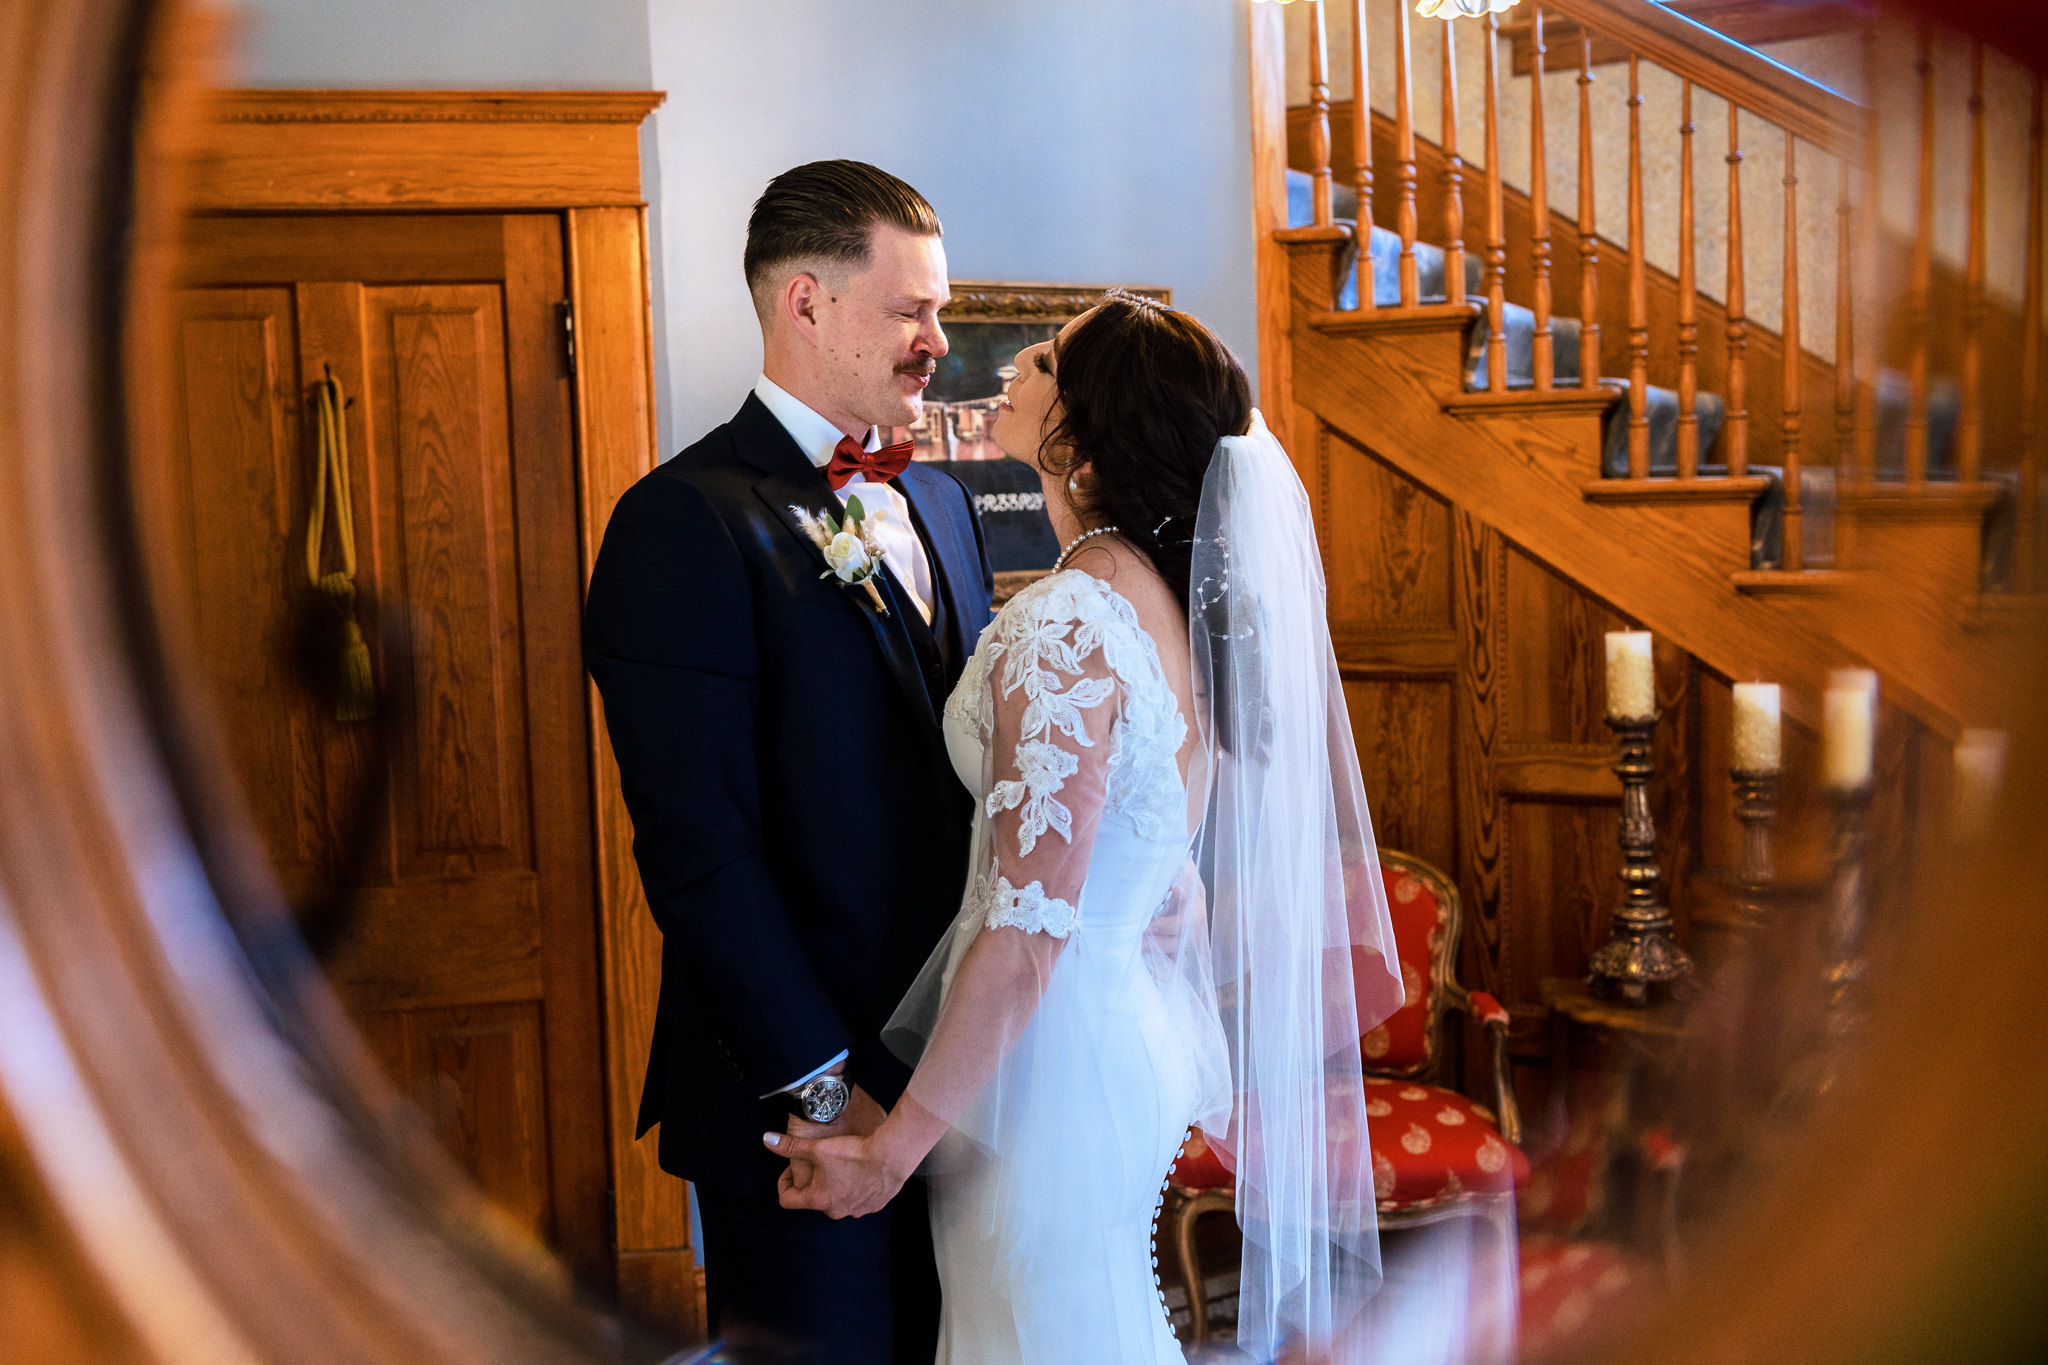 Bride & Groom seeing each other for the first time for Haley & Gytenis' Summer Wedding at The McCreery House by Colorado Wedding Photographer, Jennifer Garza.